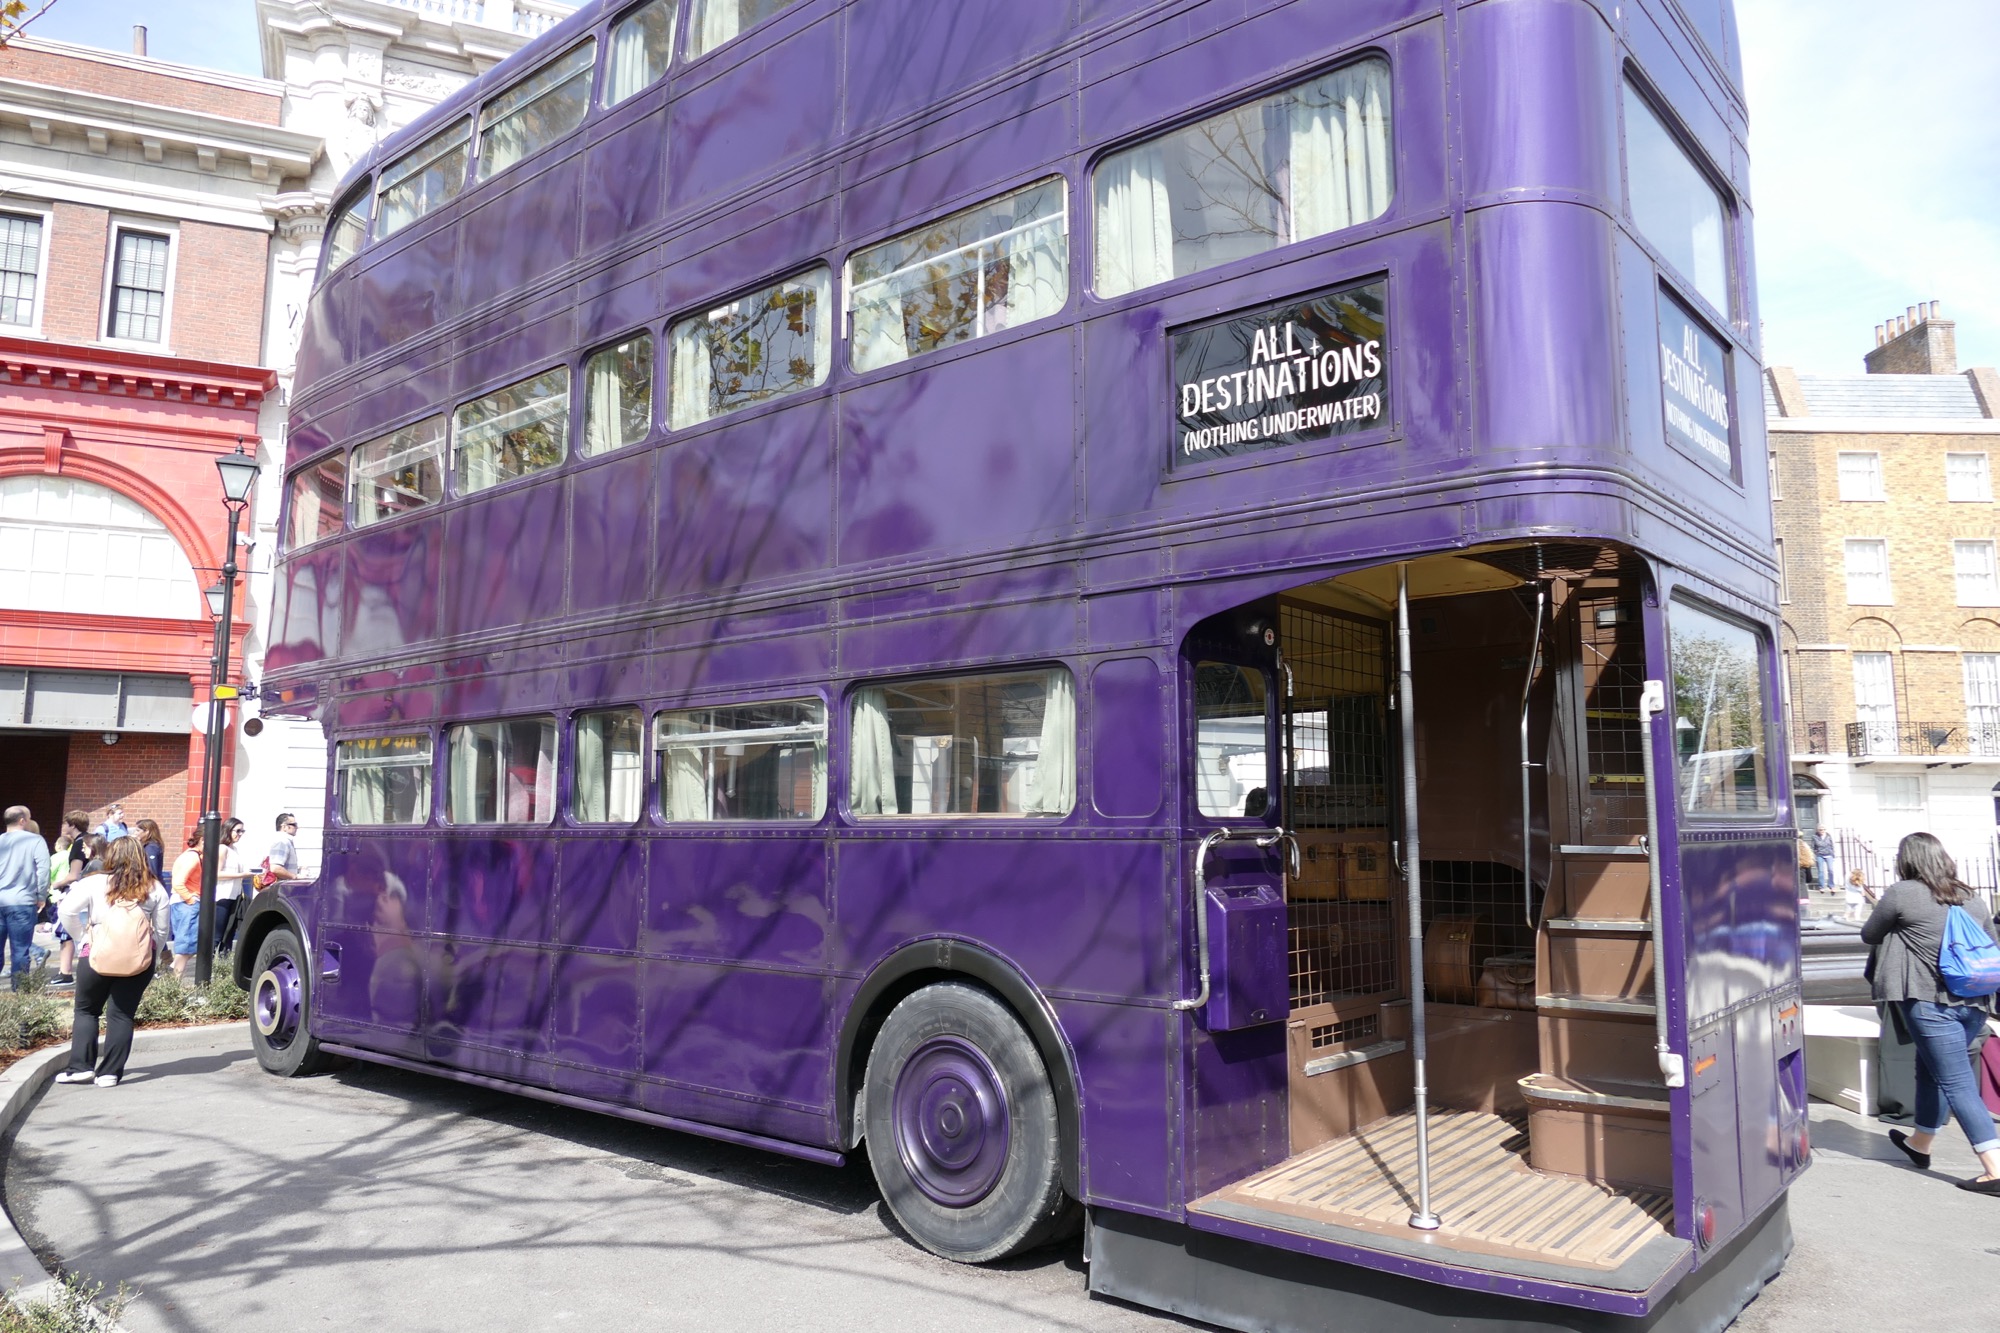 The Knight Bus - Wizarding World of Harry Potter at Universal Studios Flori